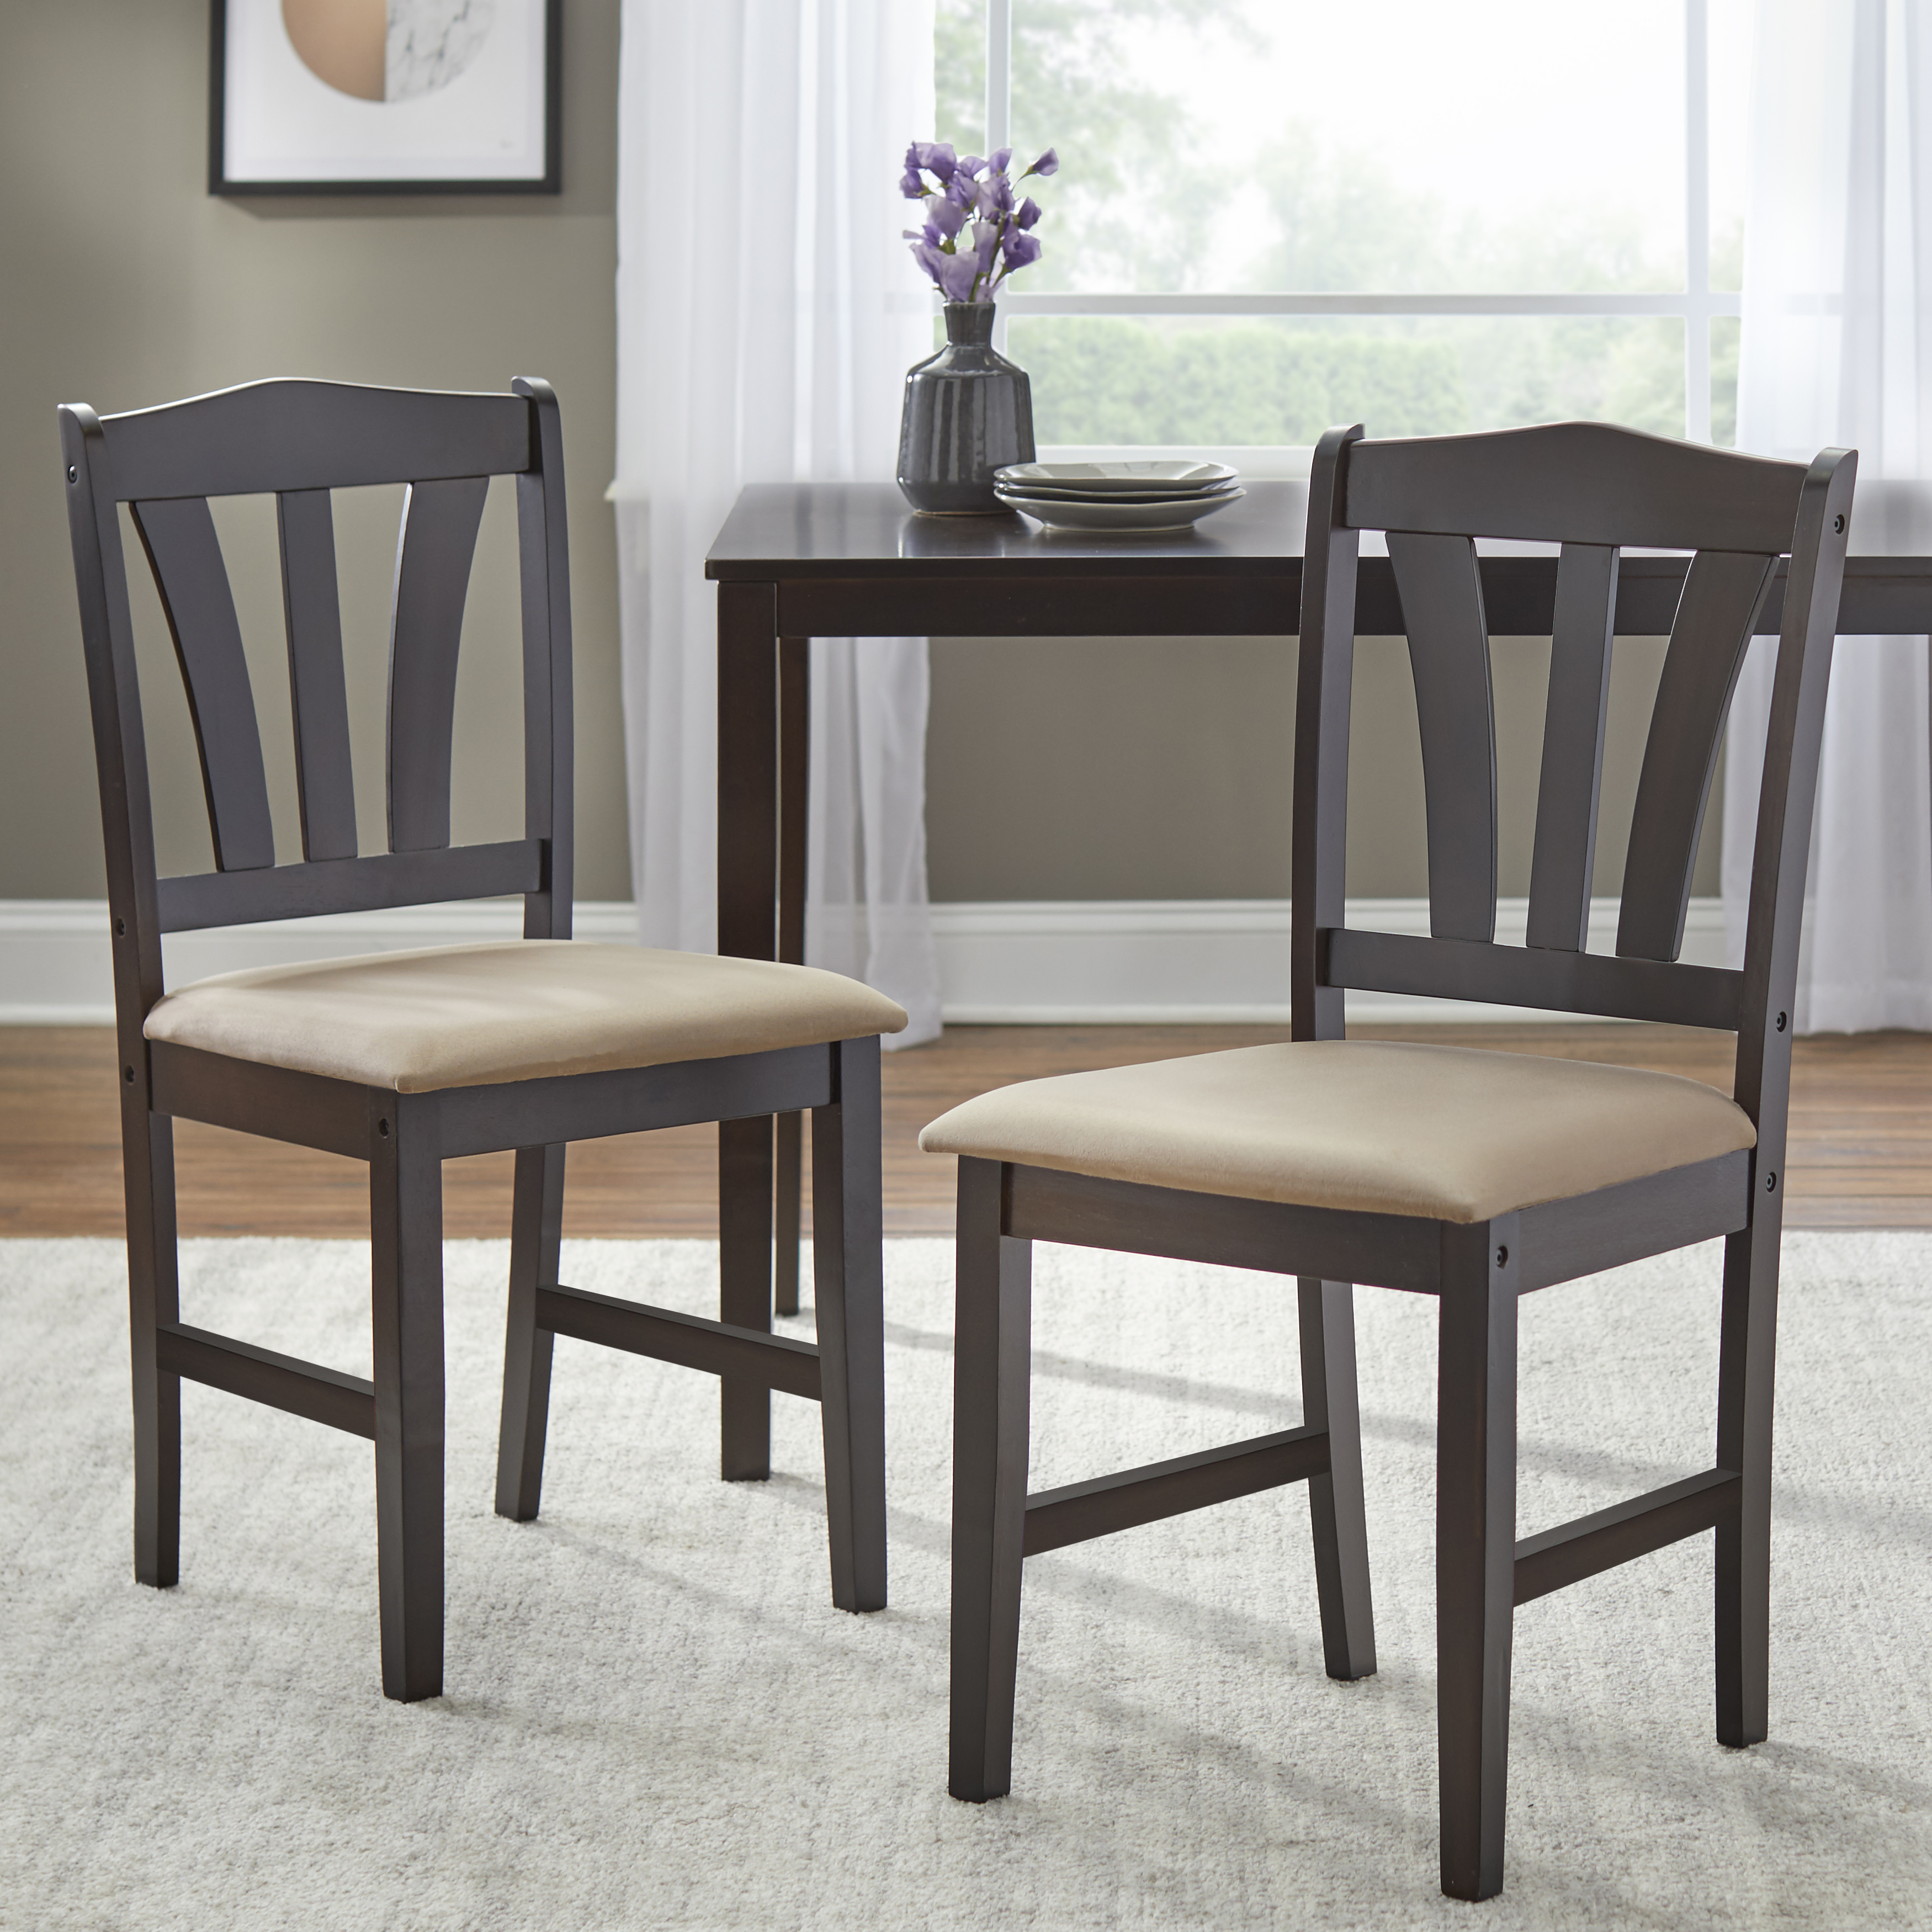 TMS Metropolitan 5-Piece Indoor Wood Dining Set with Table and Chairs, Espresso - image 3 of 7